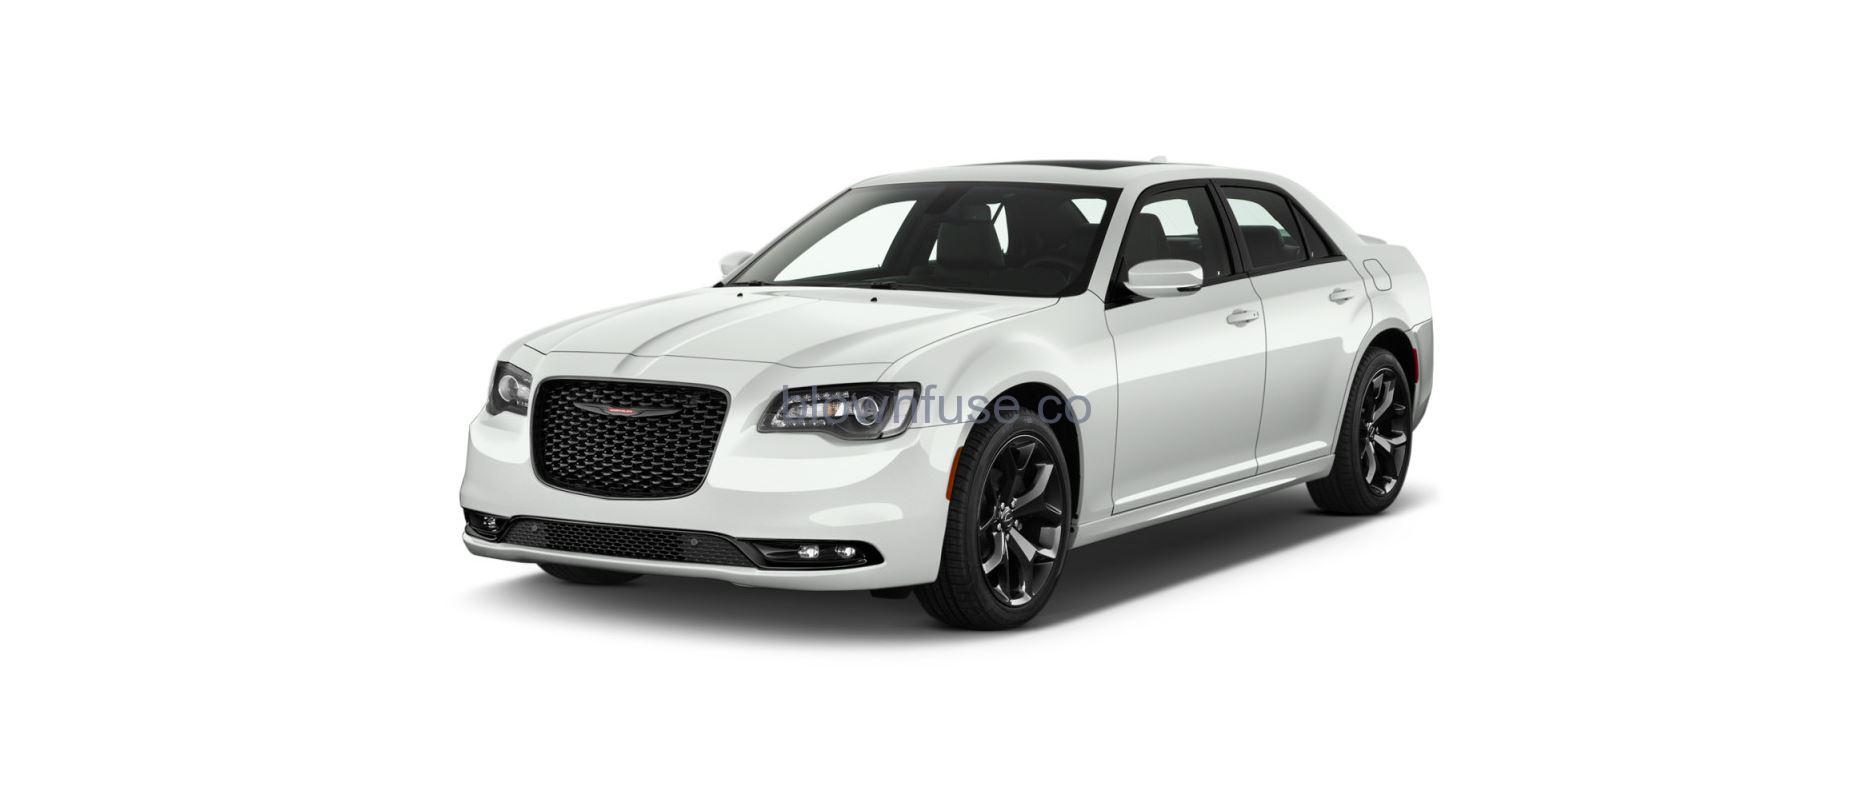 2022 Chrysler 300 feature image